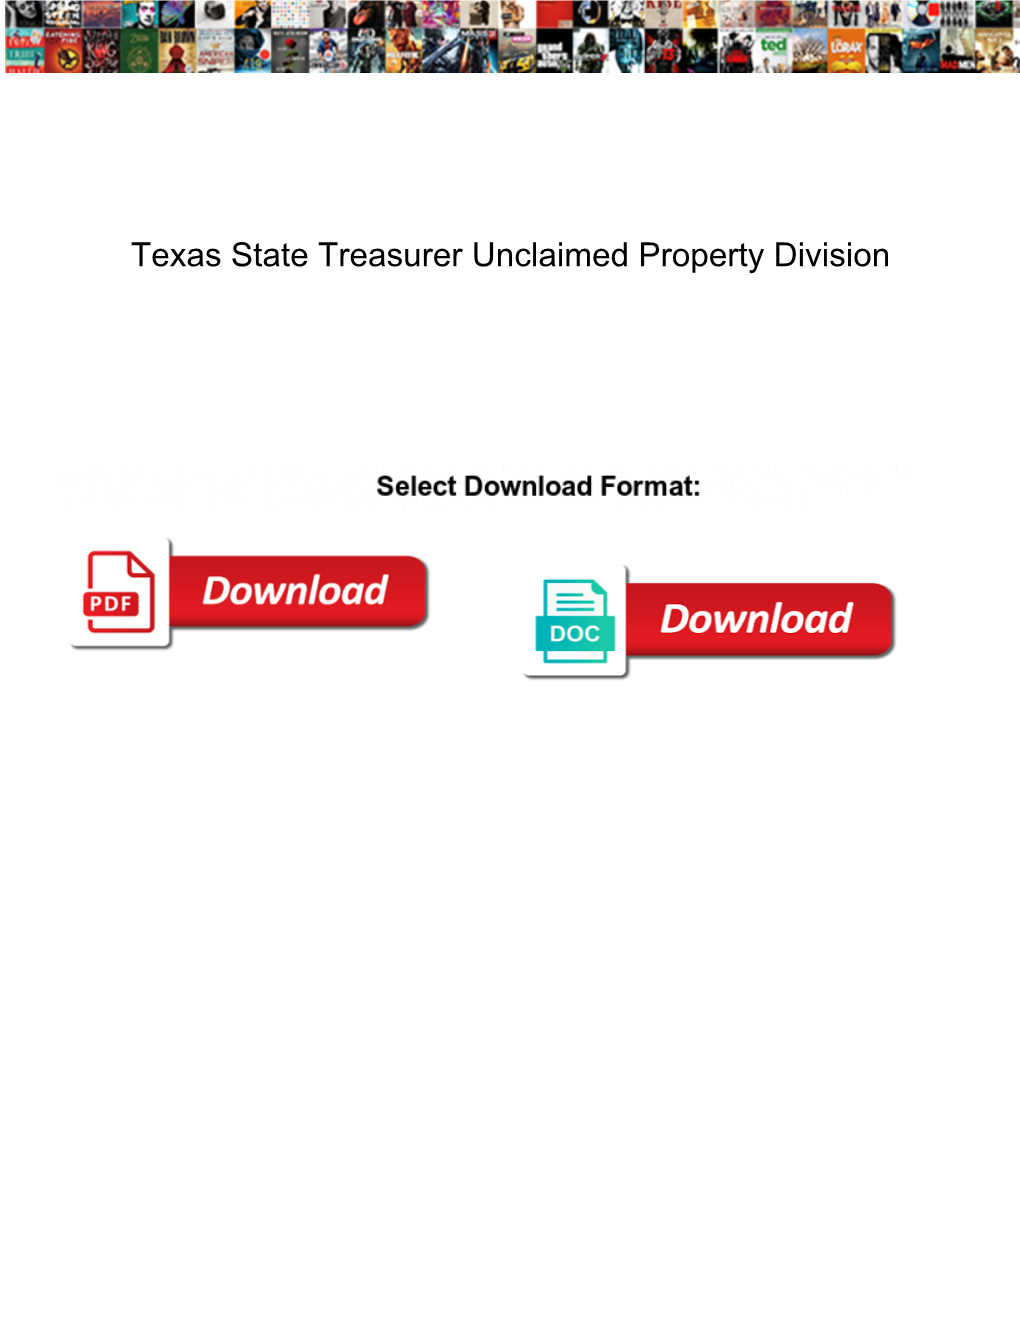 Texas State Treasurer Unclaimed Property Division